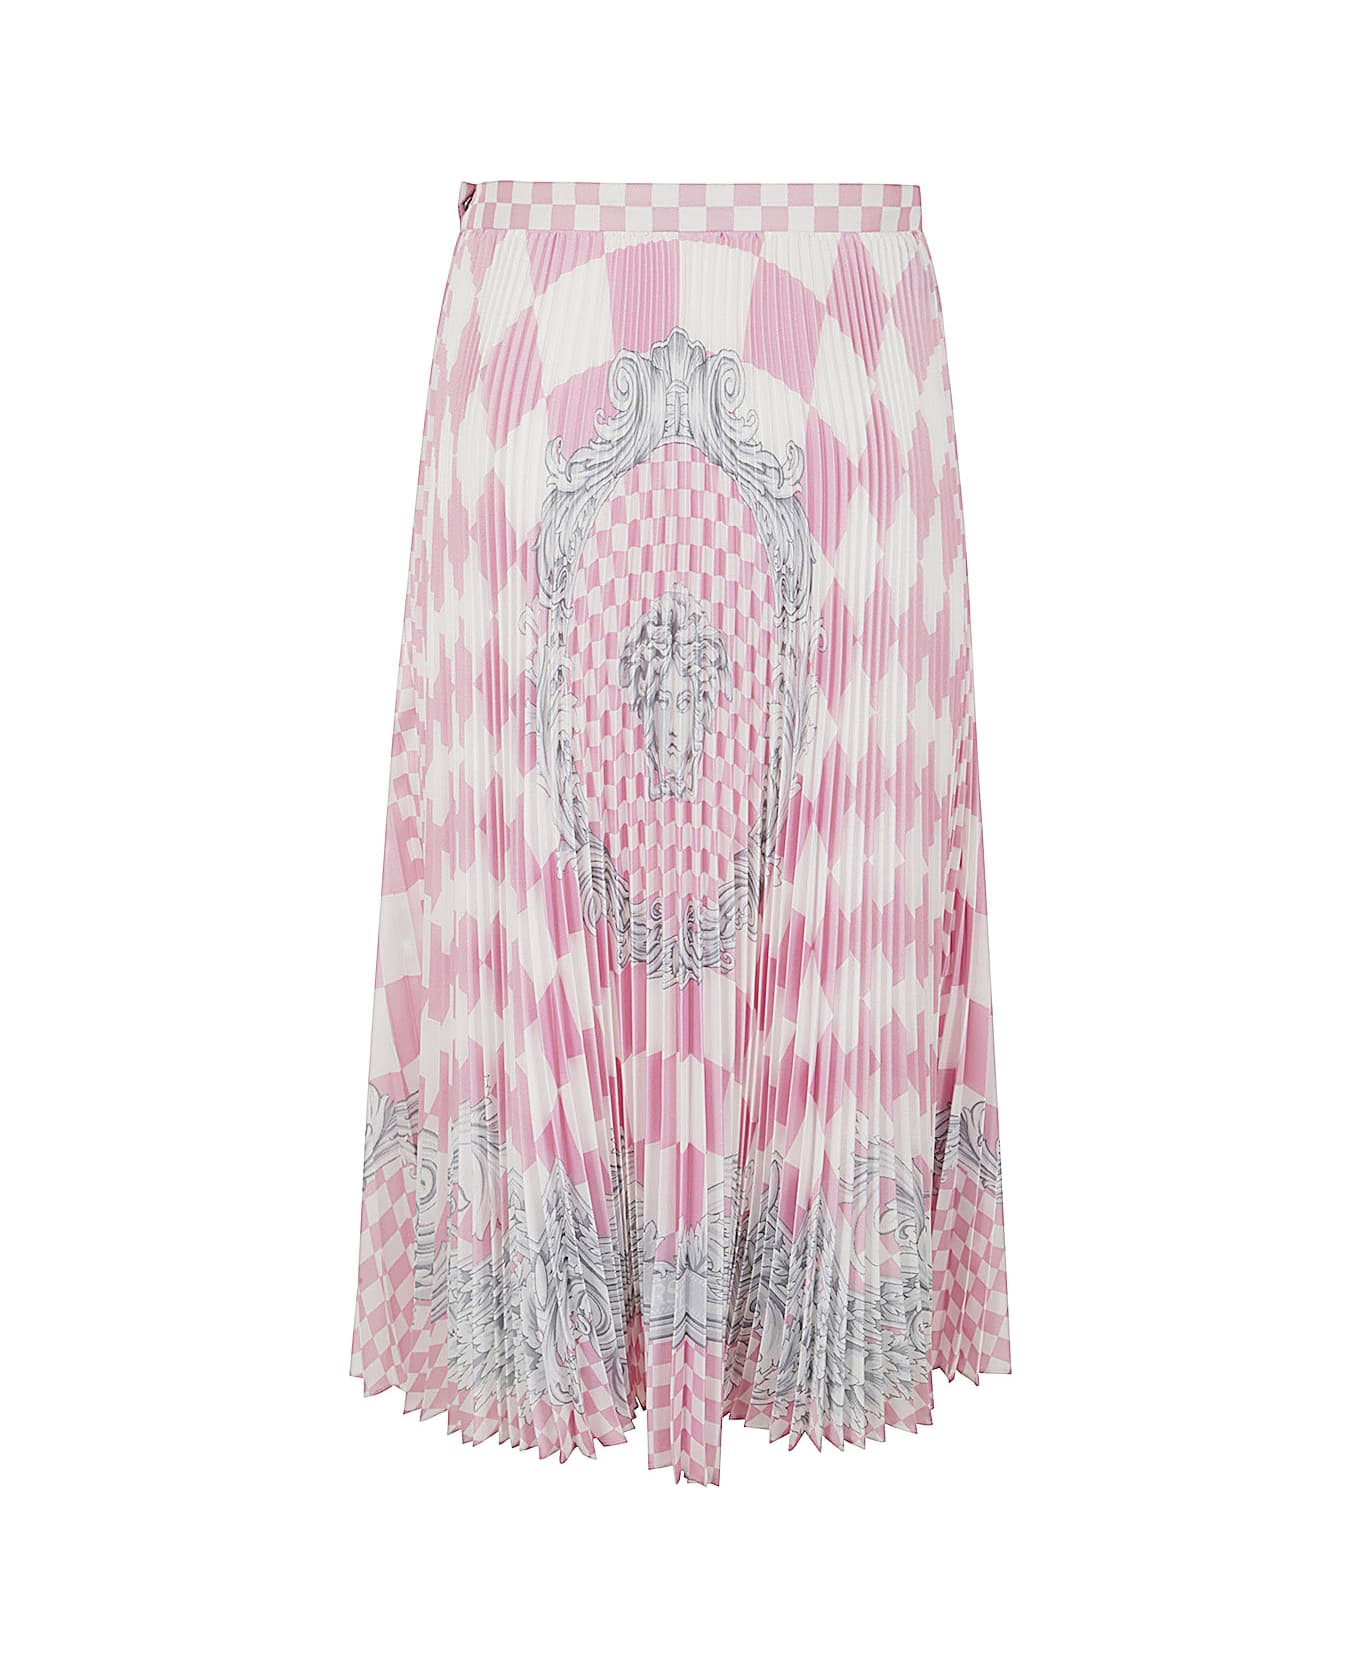 Versace Baroque Silver Printed Skirt - Pastel Pink White Silver